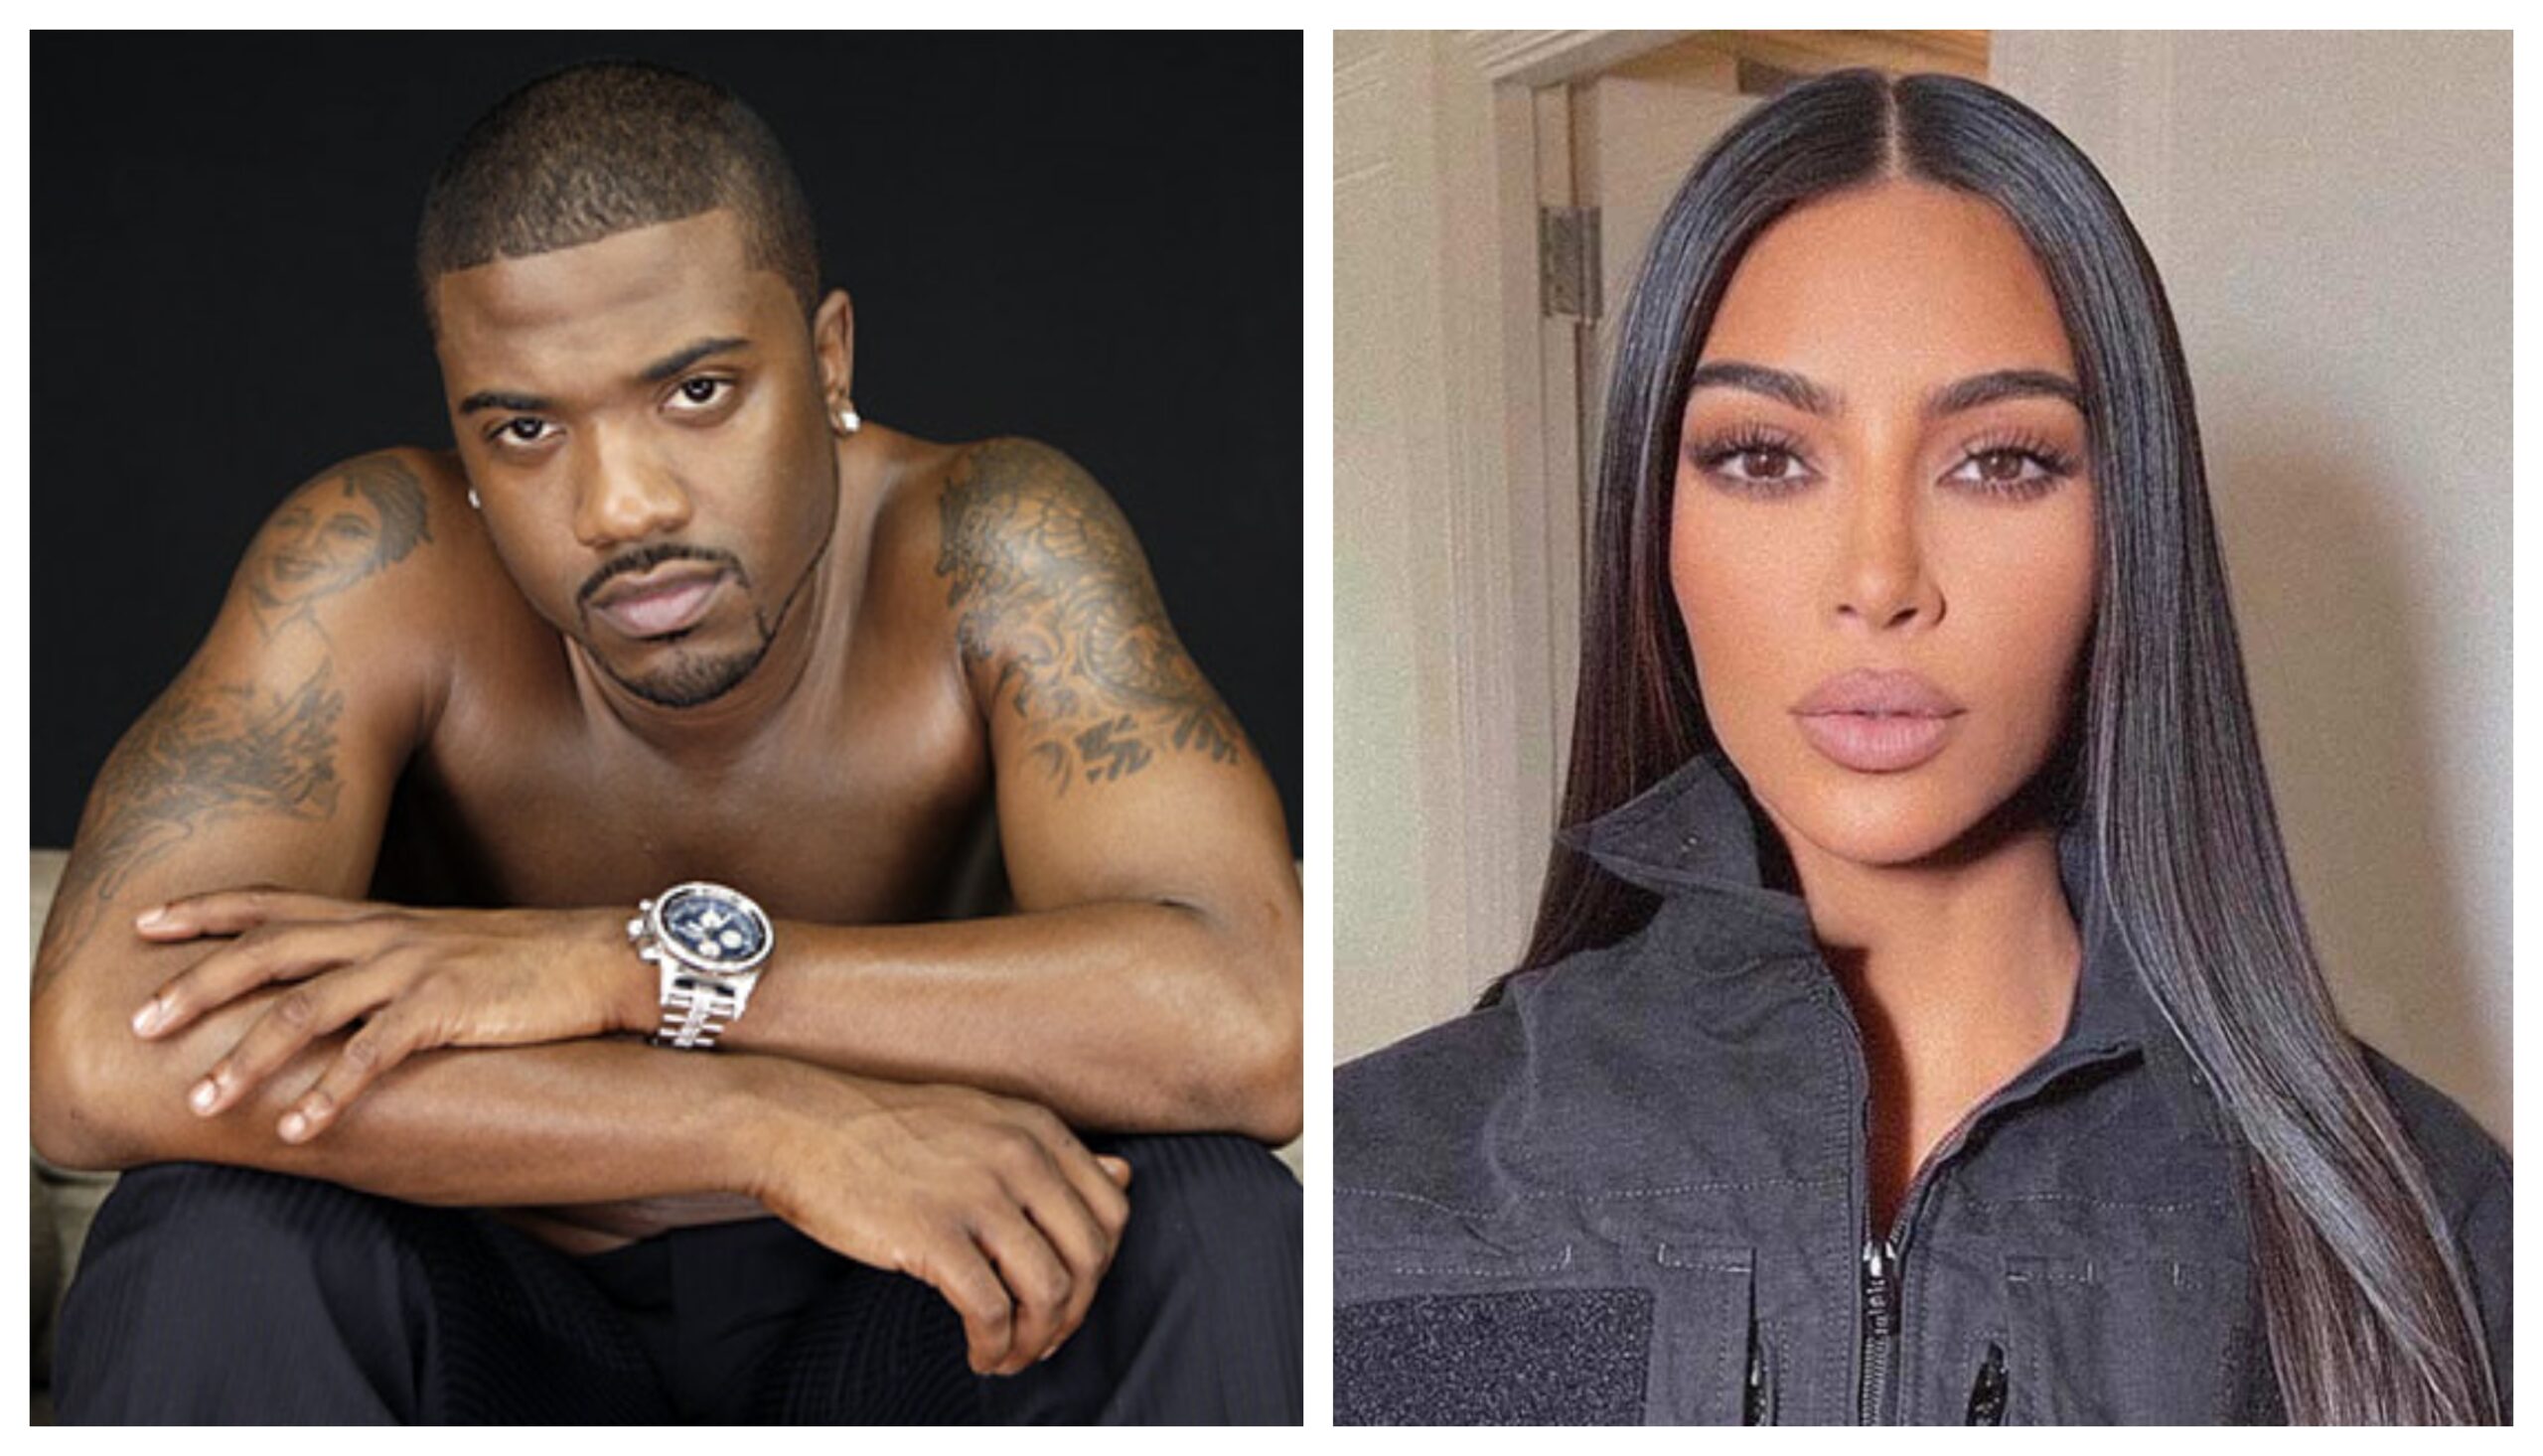 andrew kheir recommends watch rayj sex tape pic